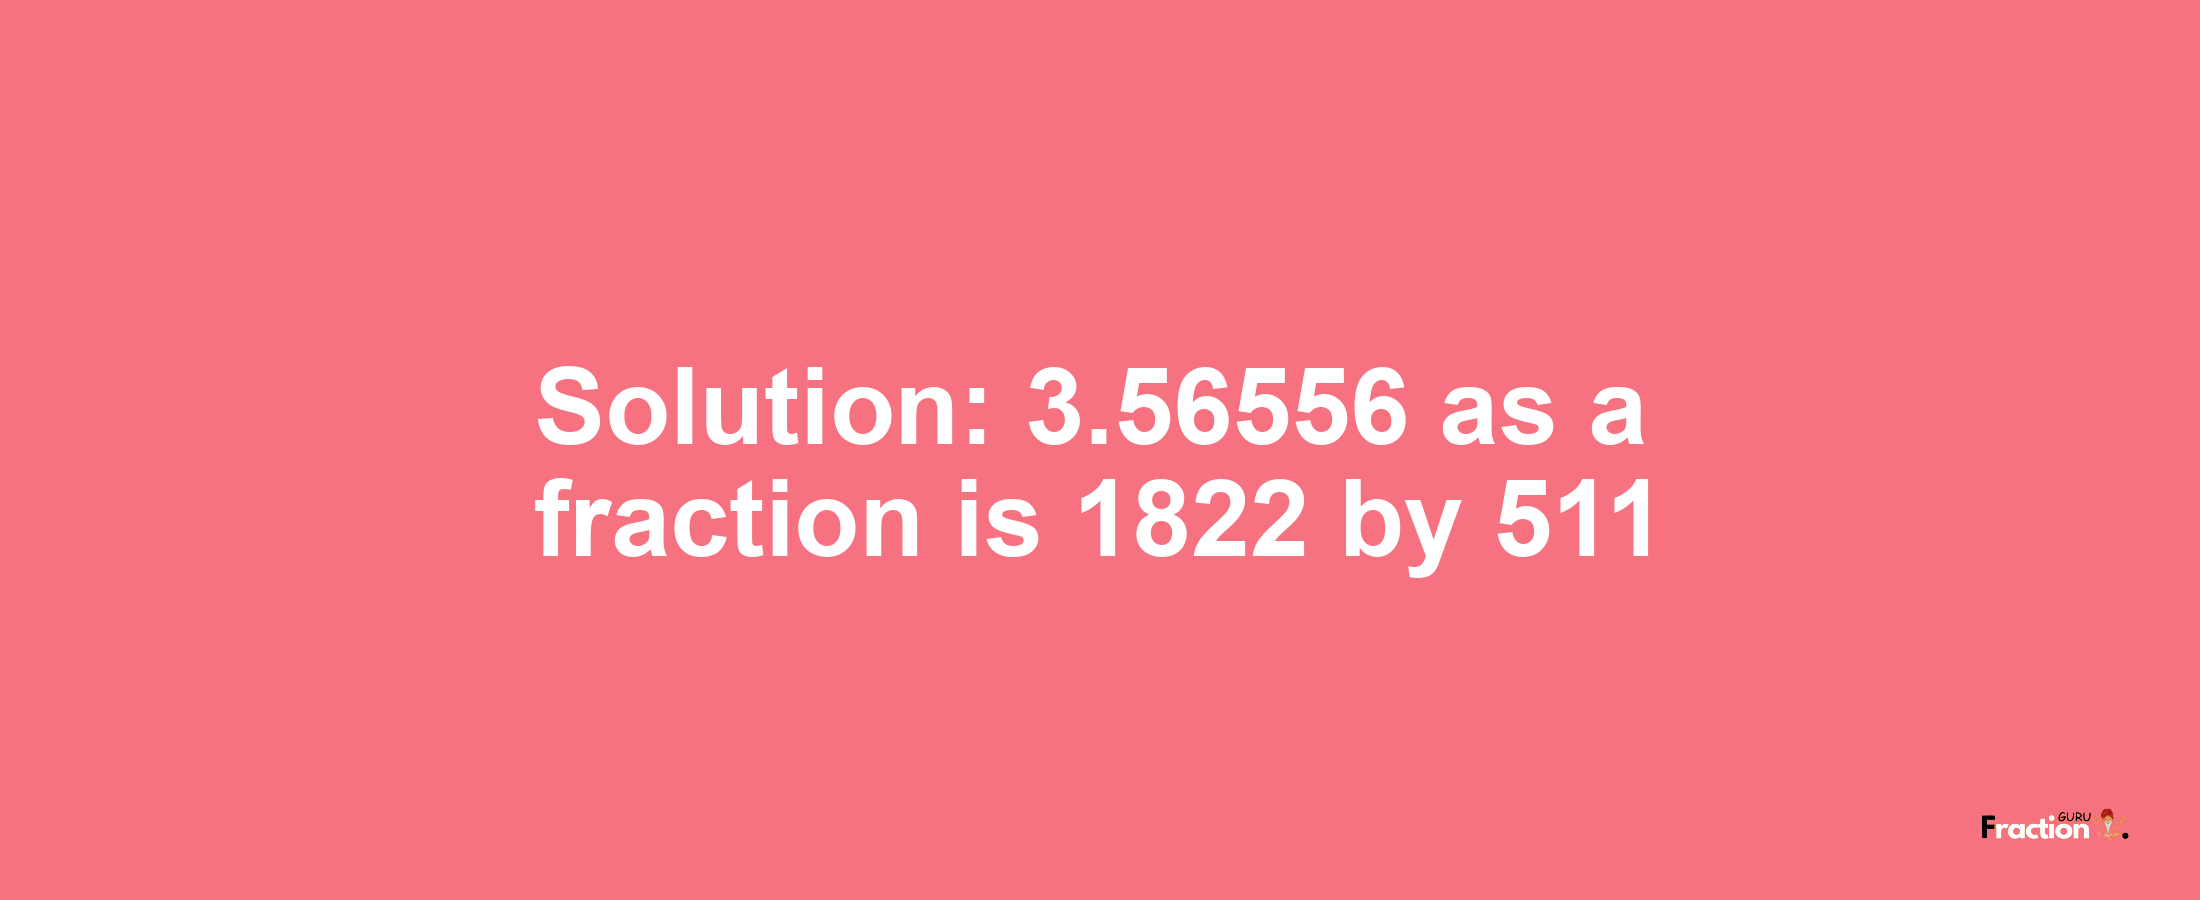 Solution:3.56556 as a fraction is 1822/511